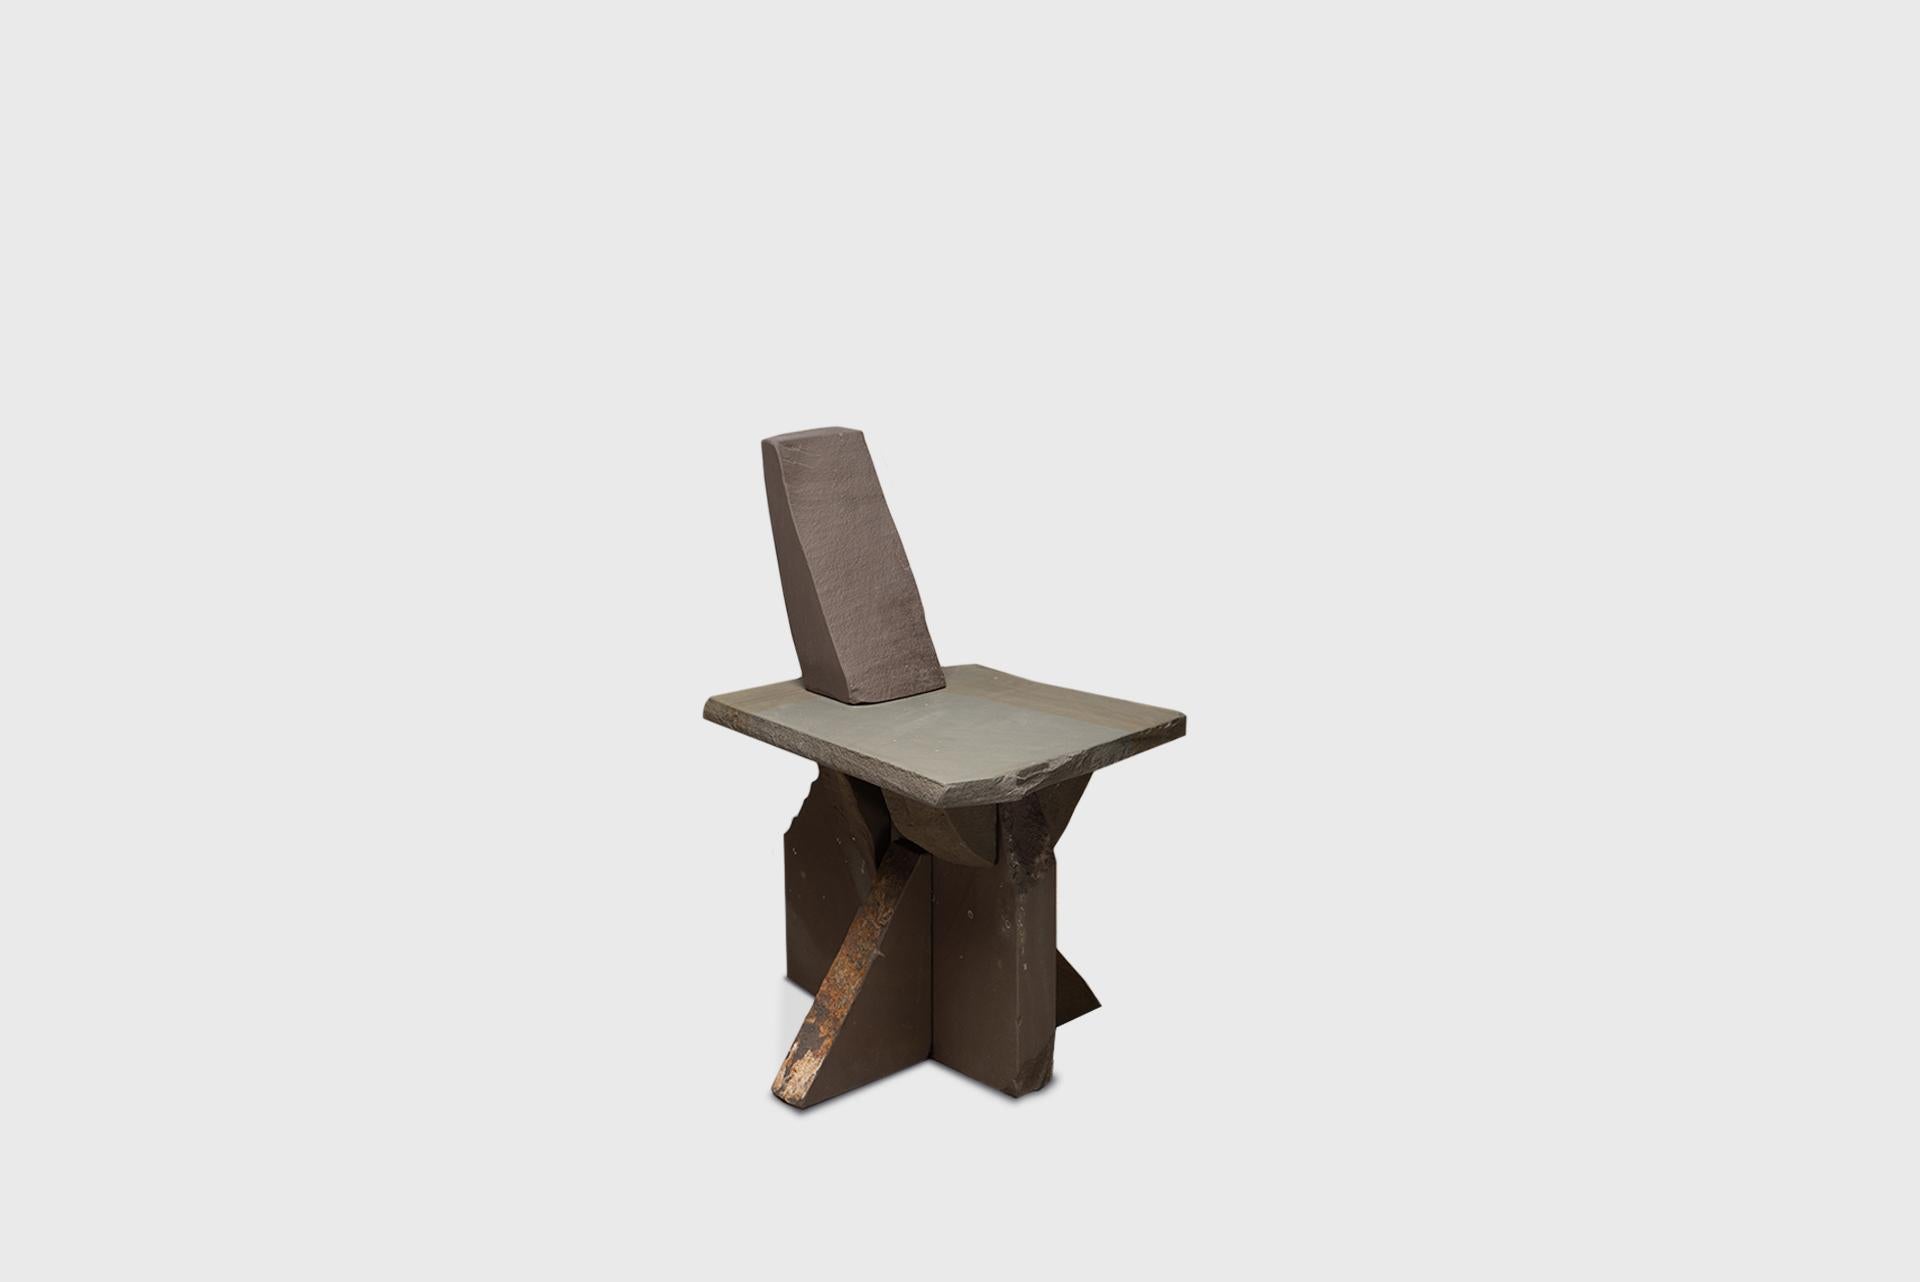 Contemporary Natural Chair 18, Graywacke Offcut Gray Stone, Carsten in der Elst For Sale 5